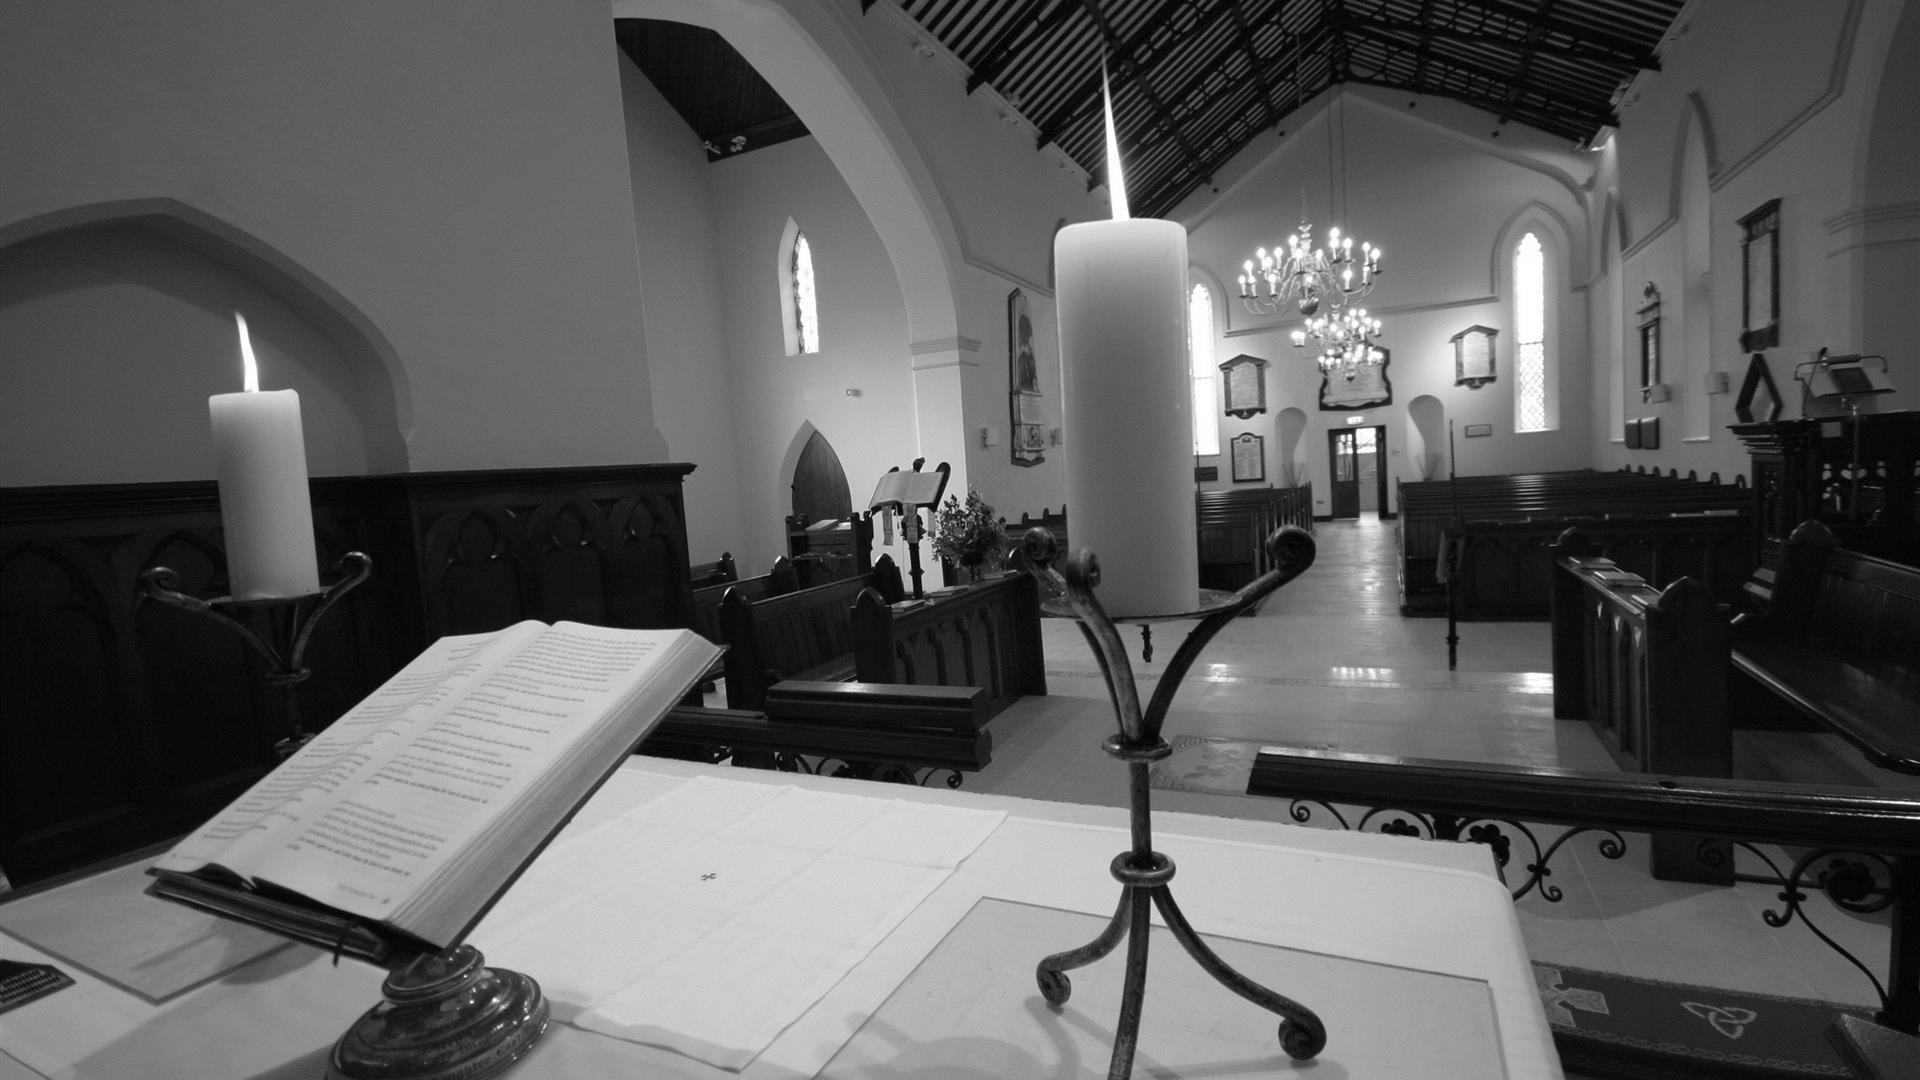 Black and white photo of from the alter of the church showing the Bible and lit candlesticks overlooking the pews